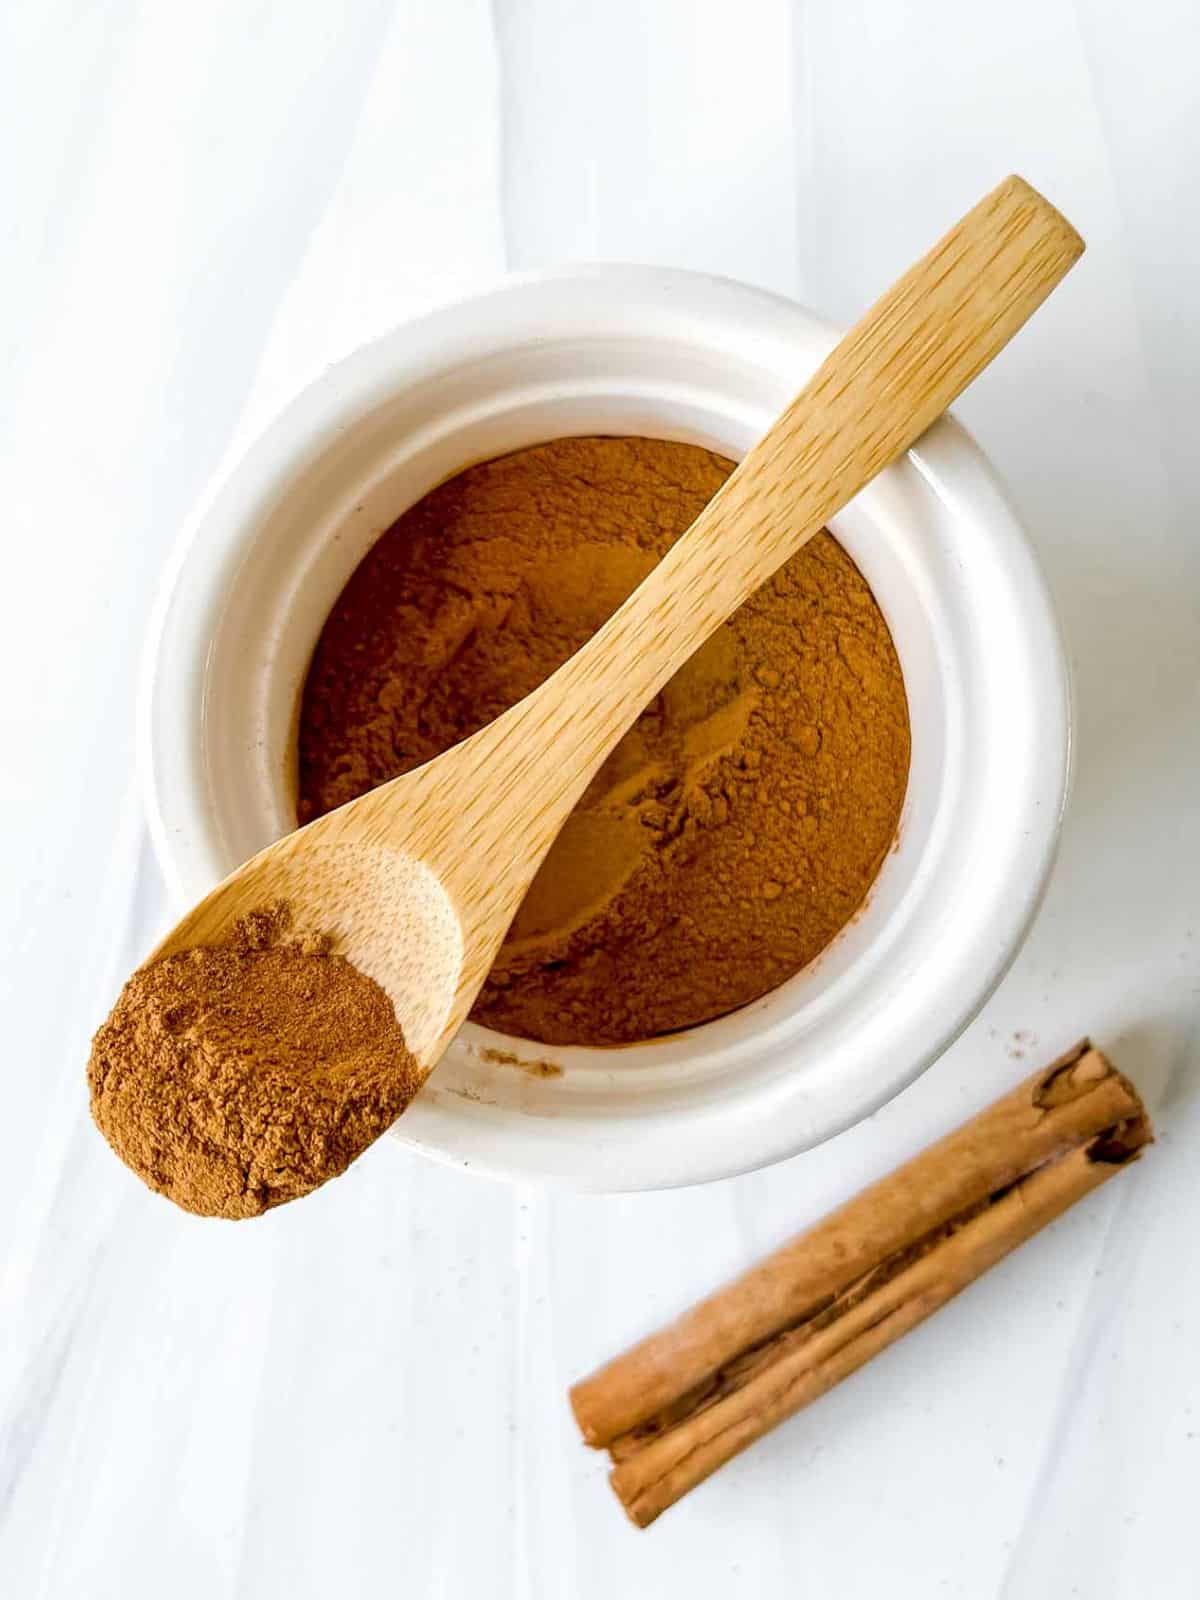 a spoonful of cinnamon on top of a bowl of ground cinnamon next to a cinnamon stick.